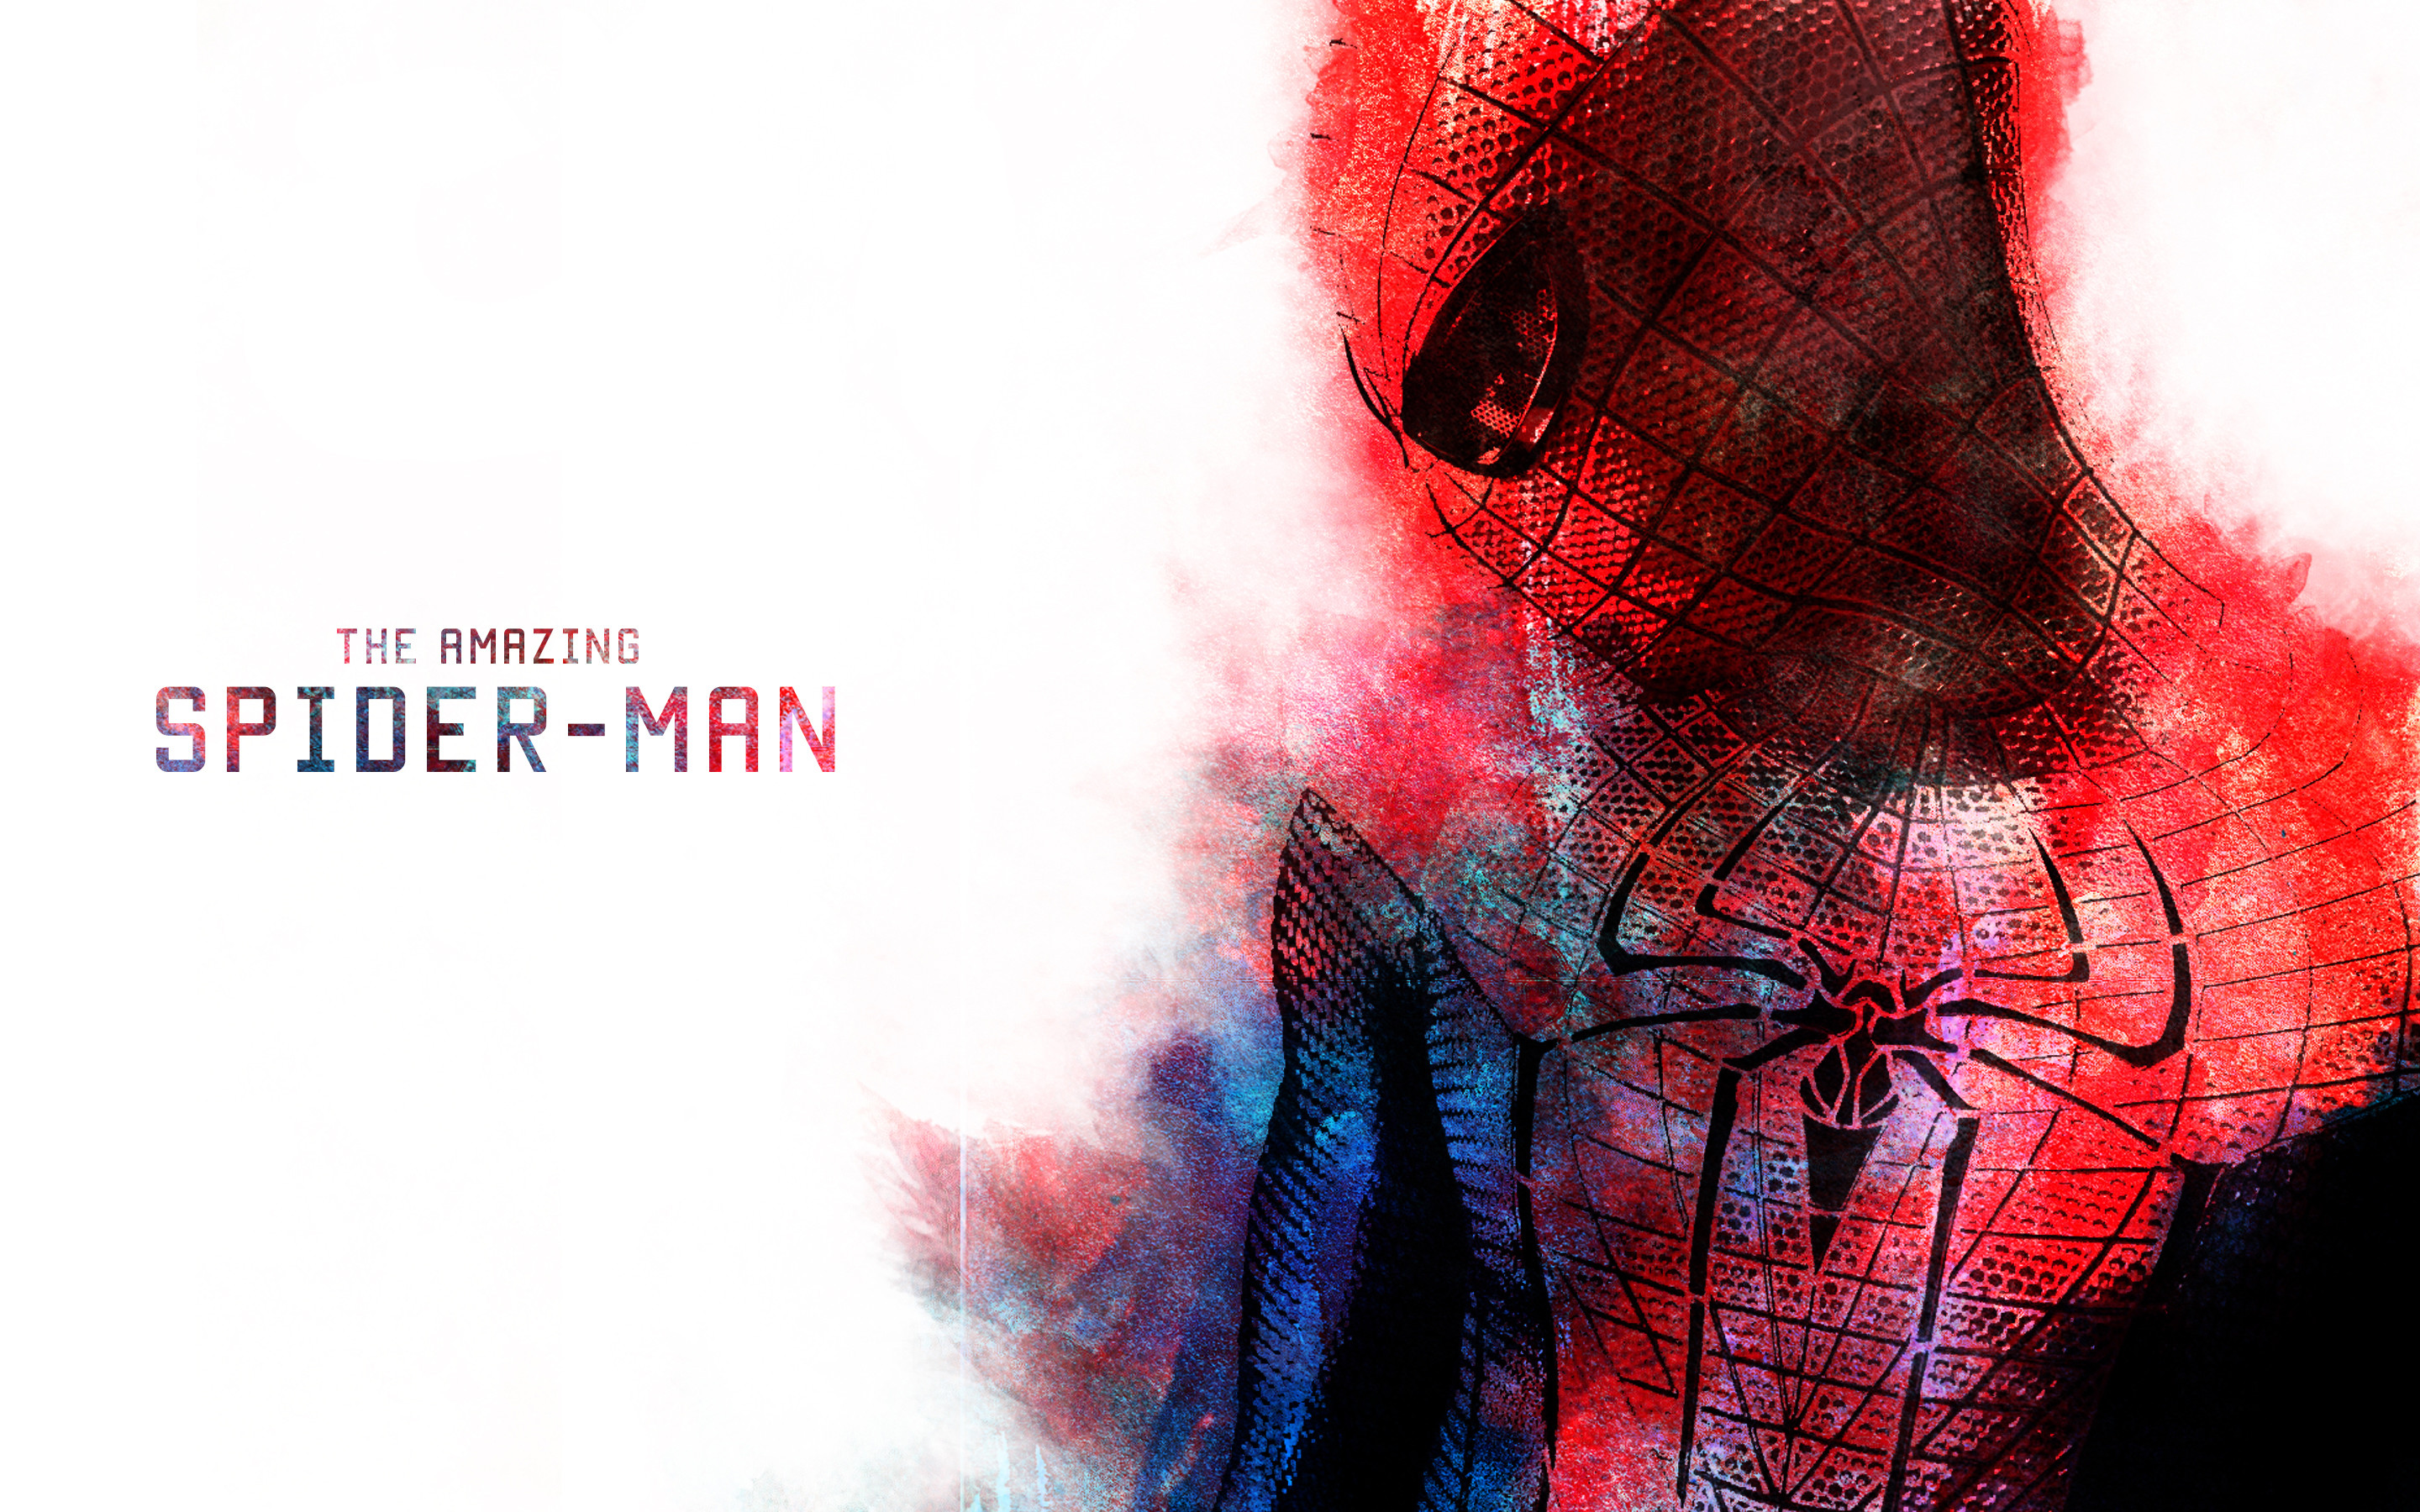 2880x1800 Amazing Spider-Man HD Wallpaper in High Resolution at Movies Wallpaper .